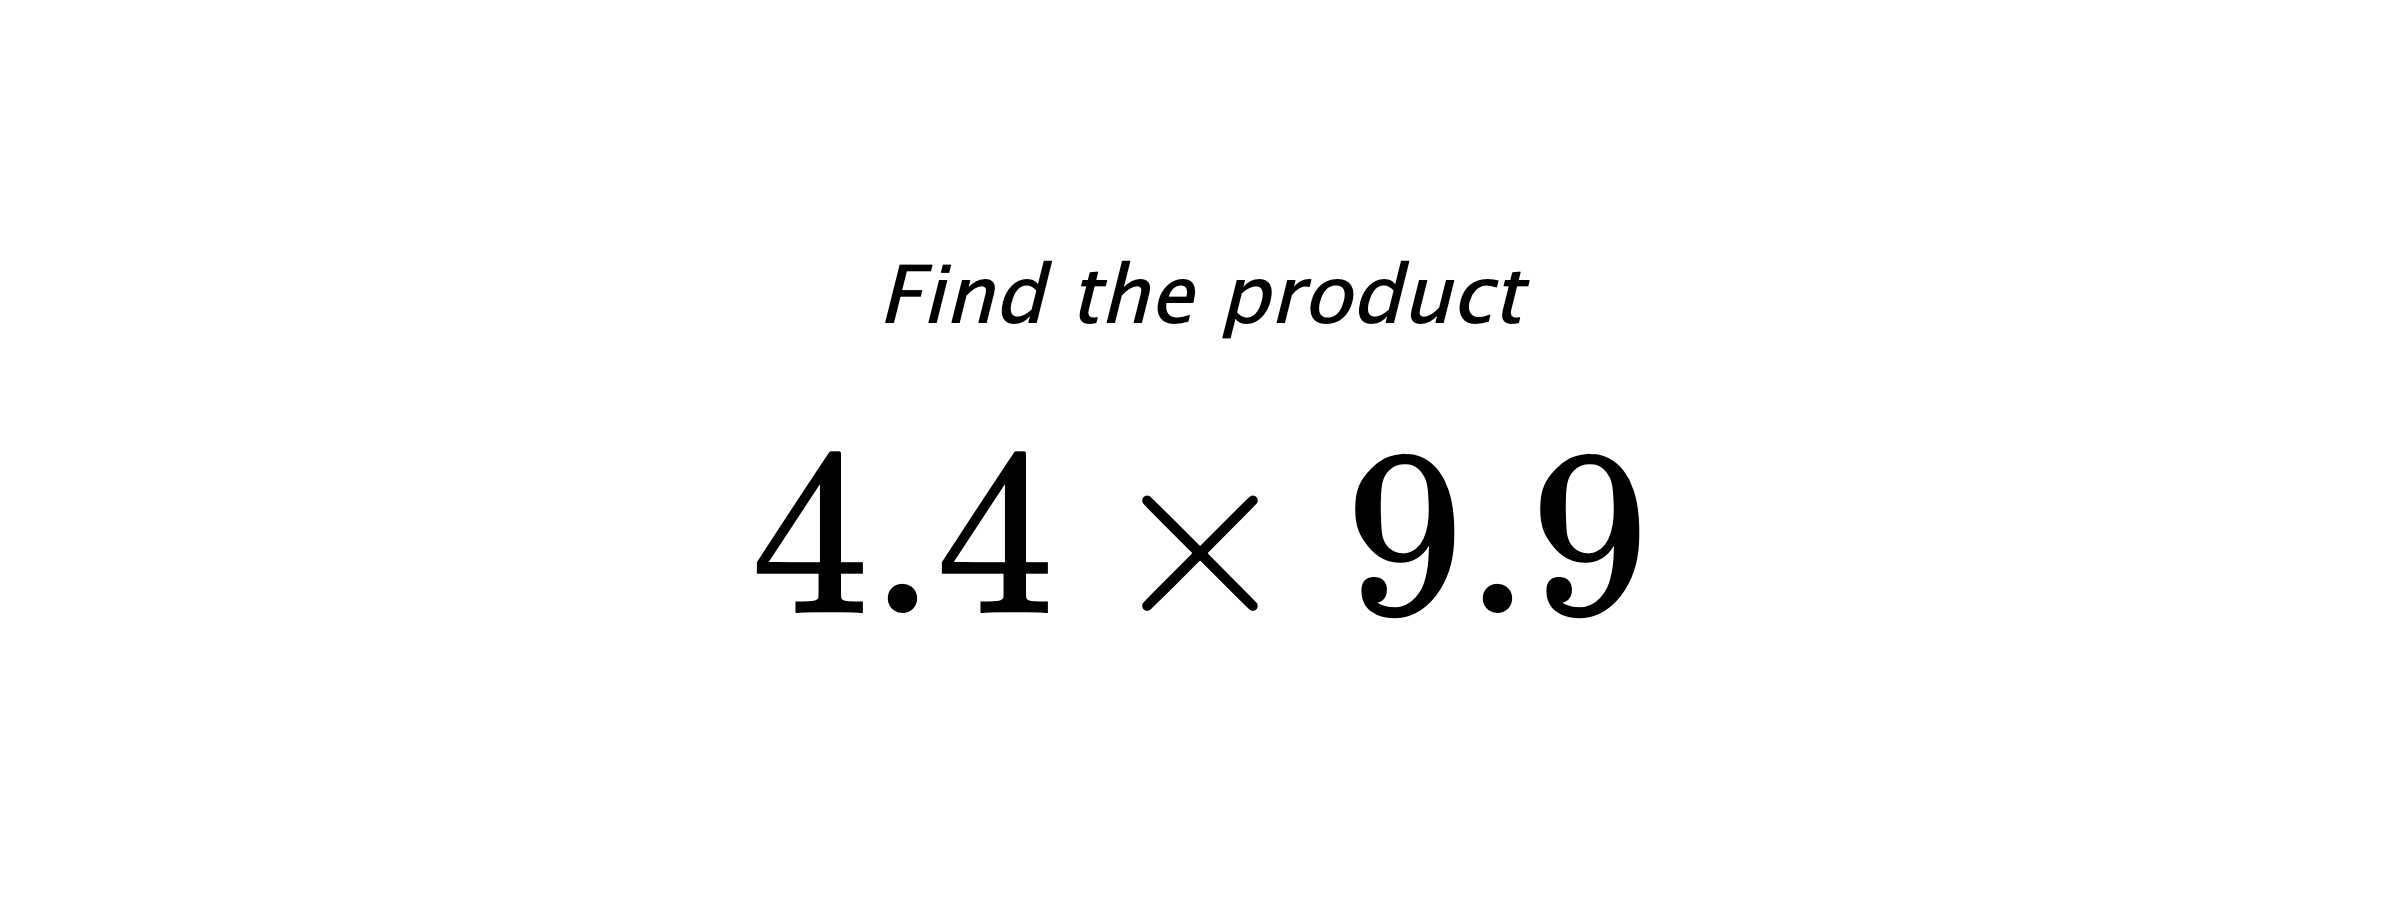 Find the product $ 4.4 \times 9.9 $